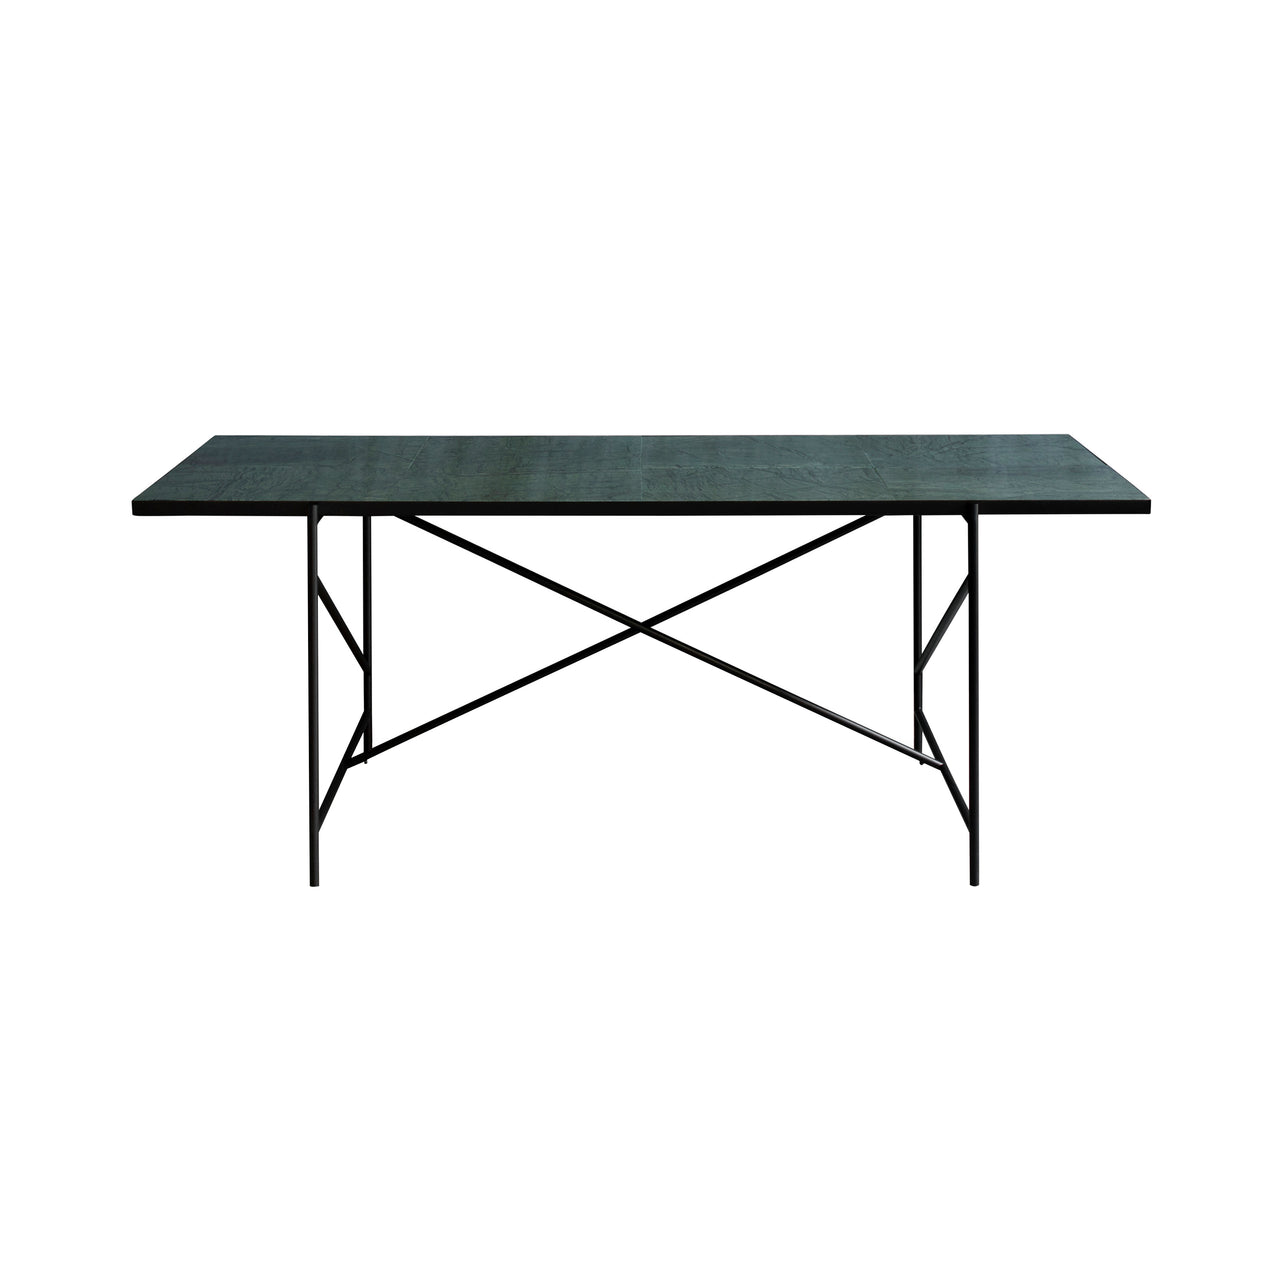 Dining Table 185: Black + Green Marble